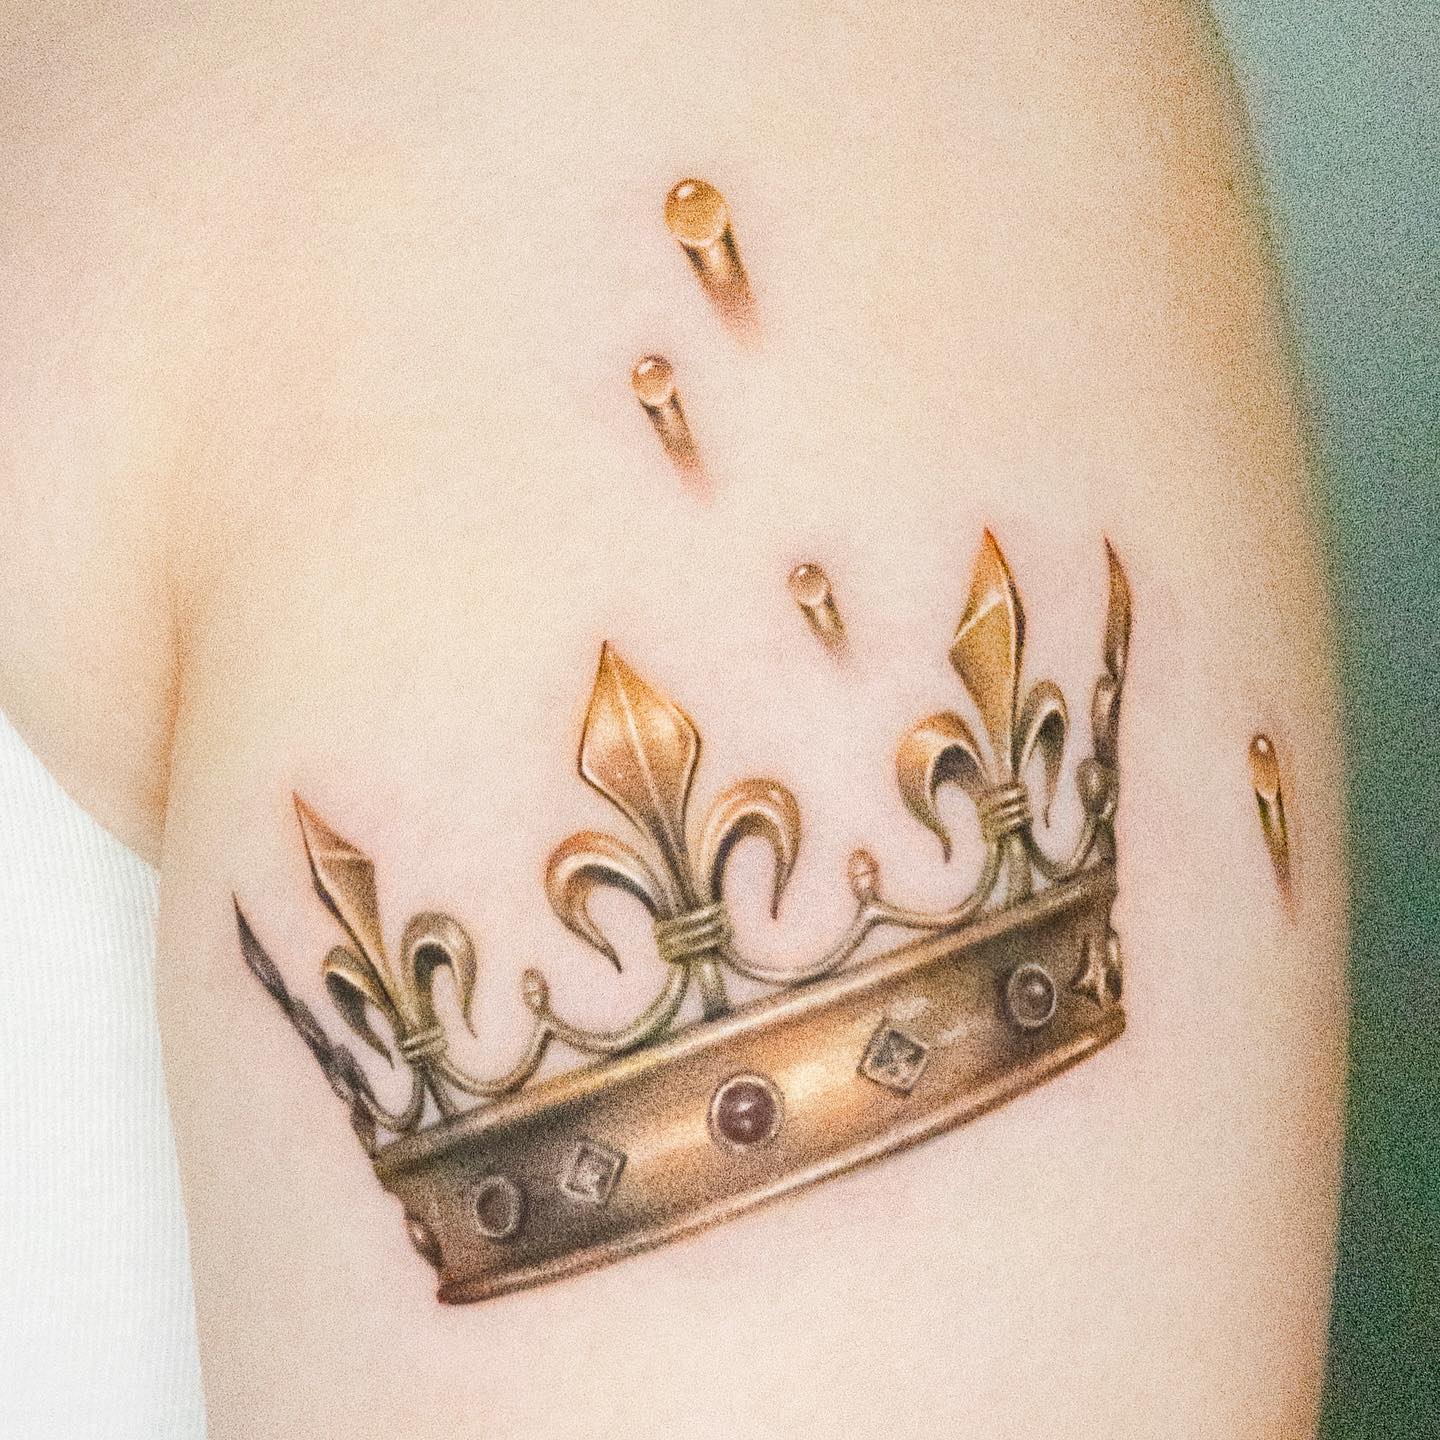 King  Queen Crown Tattoo  Reallooking Temporary Tattoos  SimplyInkedin